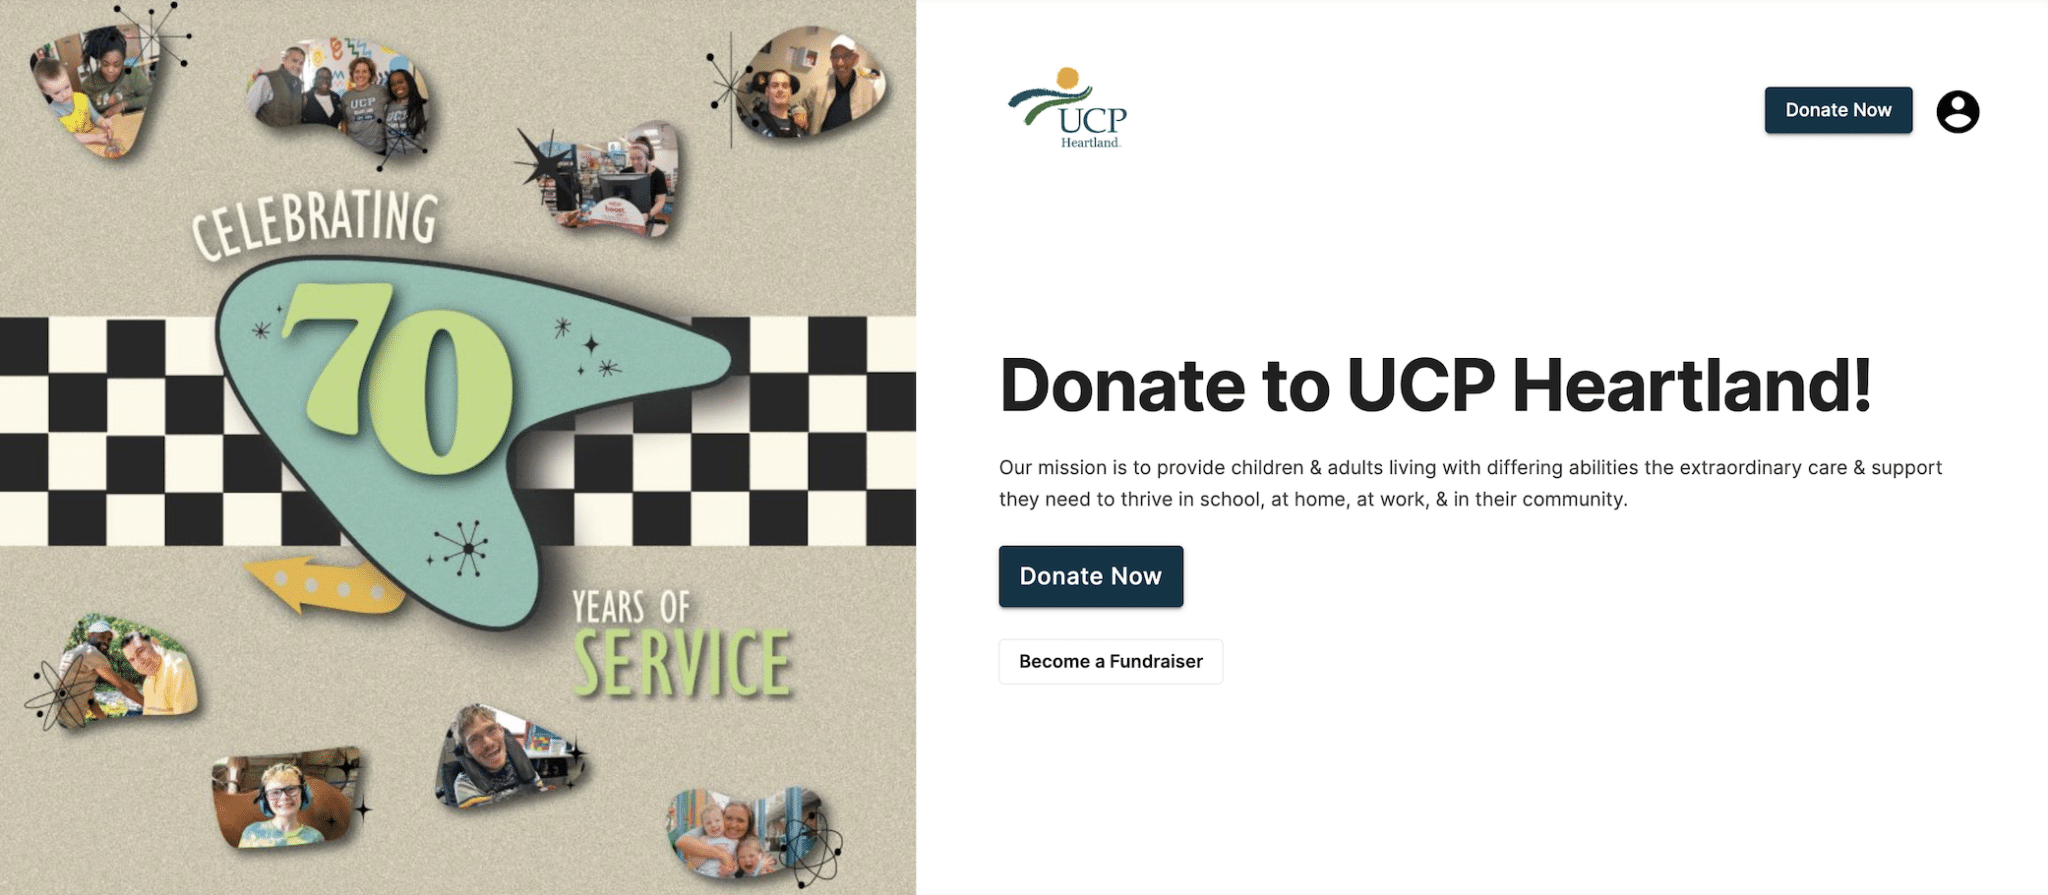 UCP Heartland is a well-designed donation page that encourages people to give to support children and adults with differing abilities. 